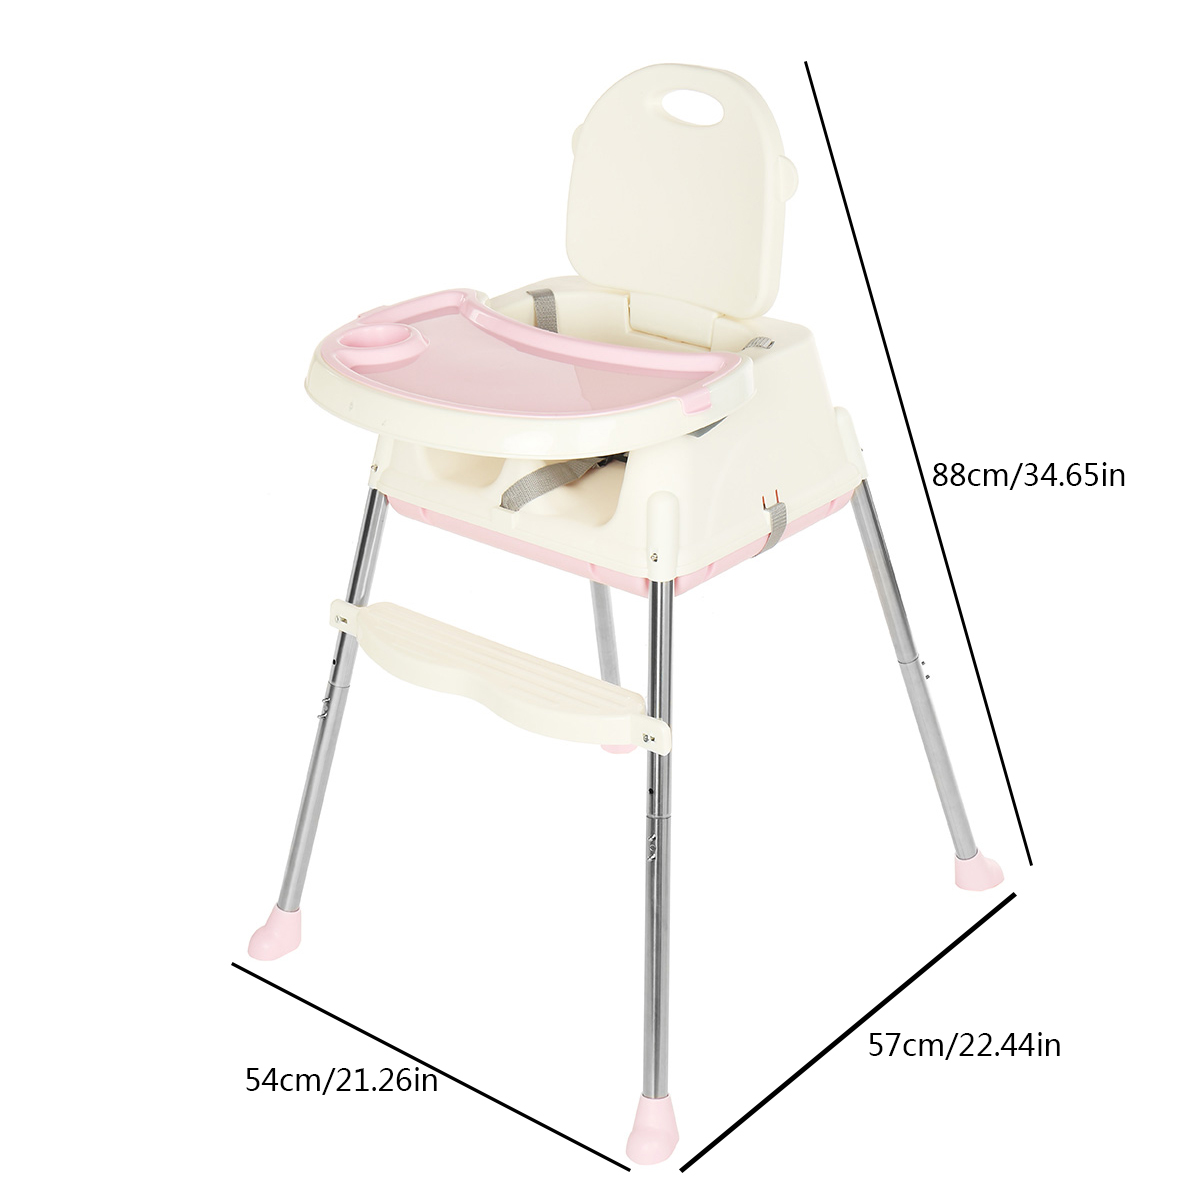 KUDOSALE-3-in-1-Adjustable-Baby-High-Chair-Table-Convertible-Play-Seat-Booster-Toddler-Feeding-with--1749429-9